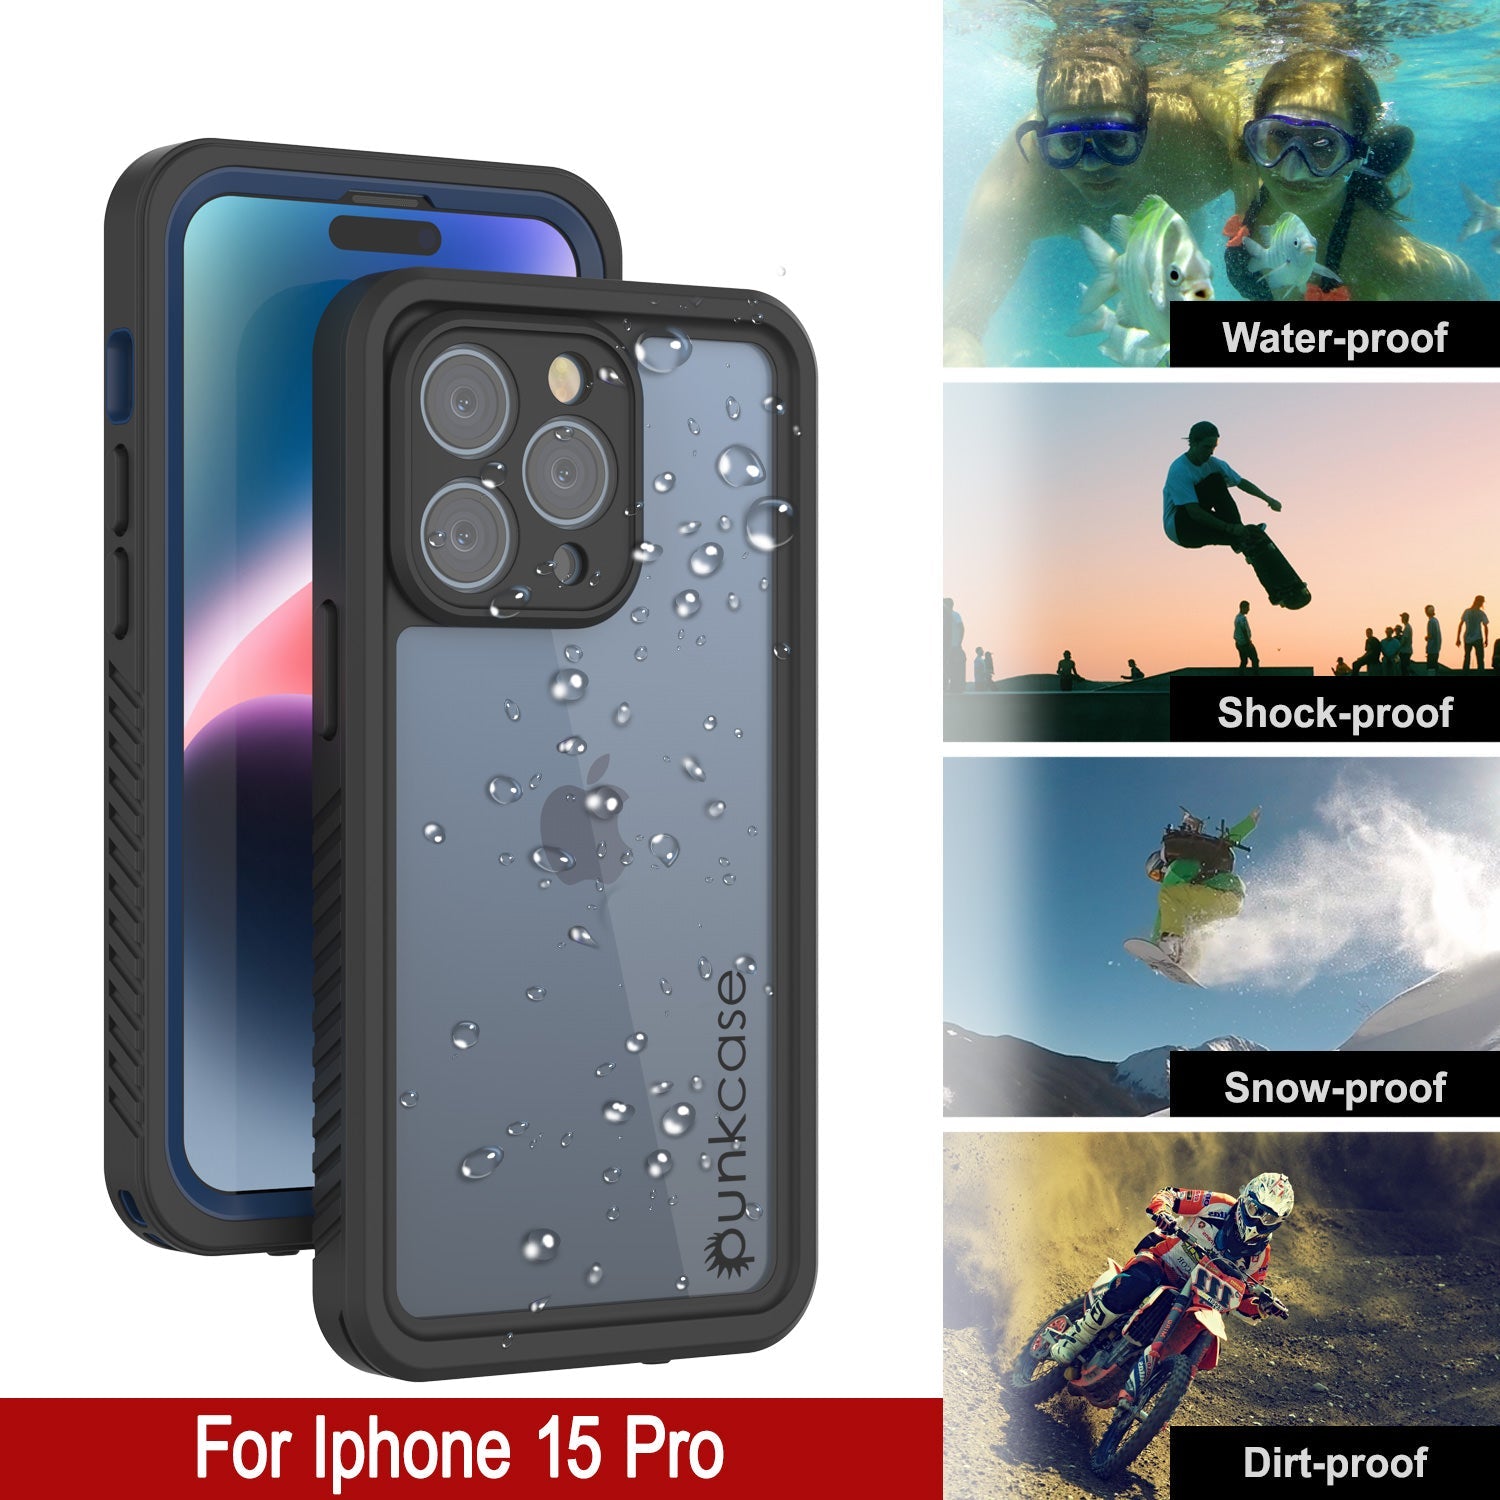 iPhone 15 Pro Waterproof Case, Punkcase [Extreme Series] Armor Cover W/ Built In Screen Protector [Navy Blue]